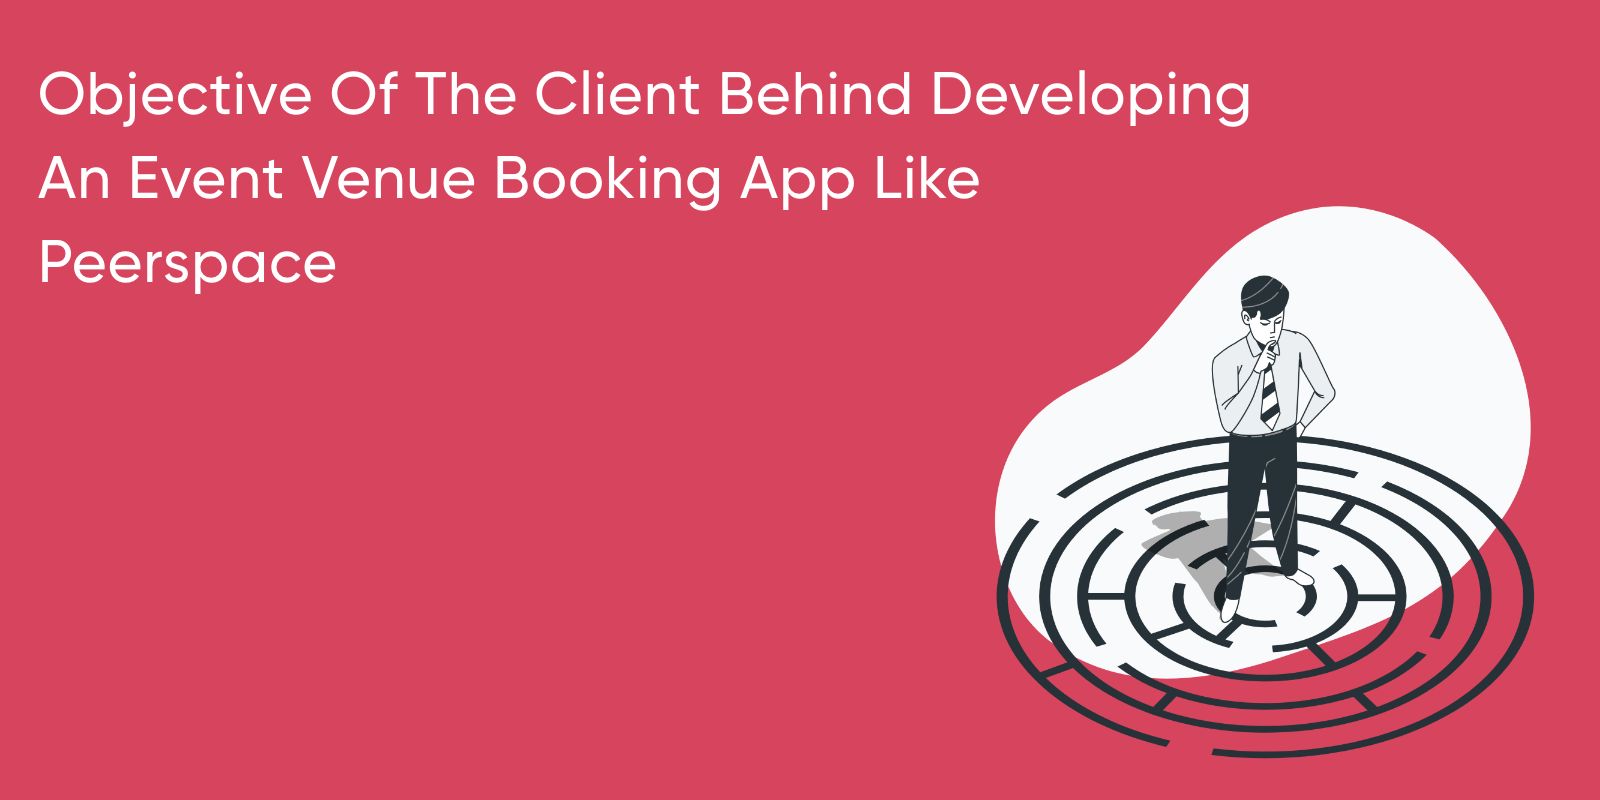 Objective of client behind developing an event app